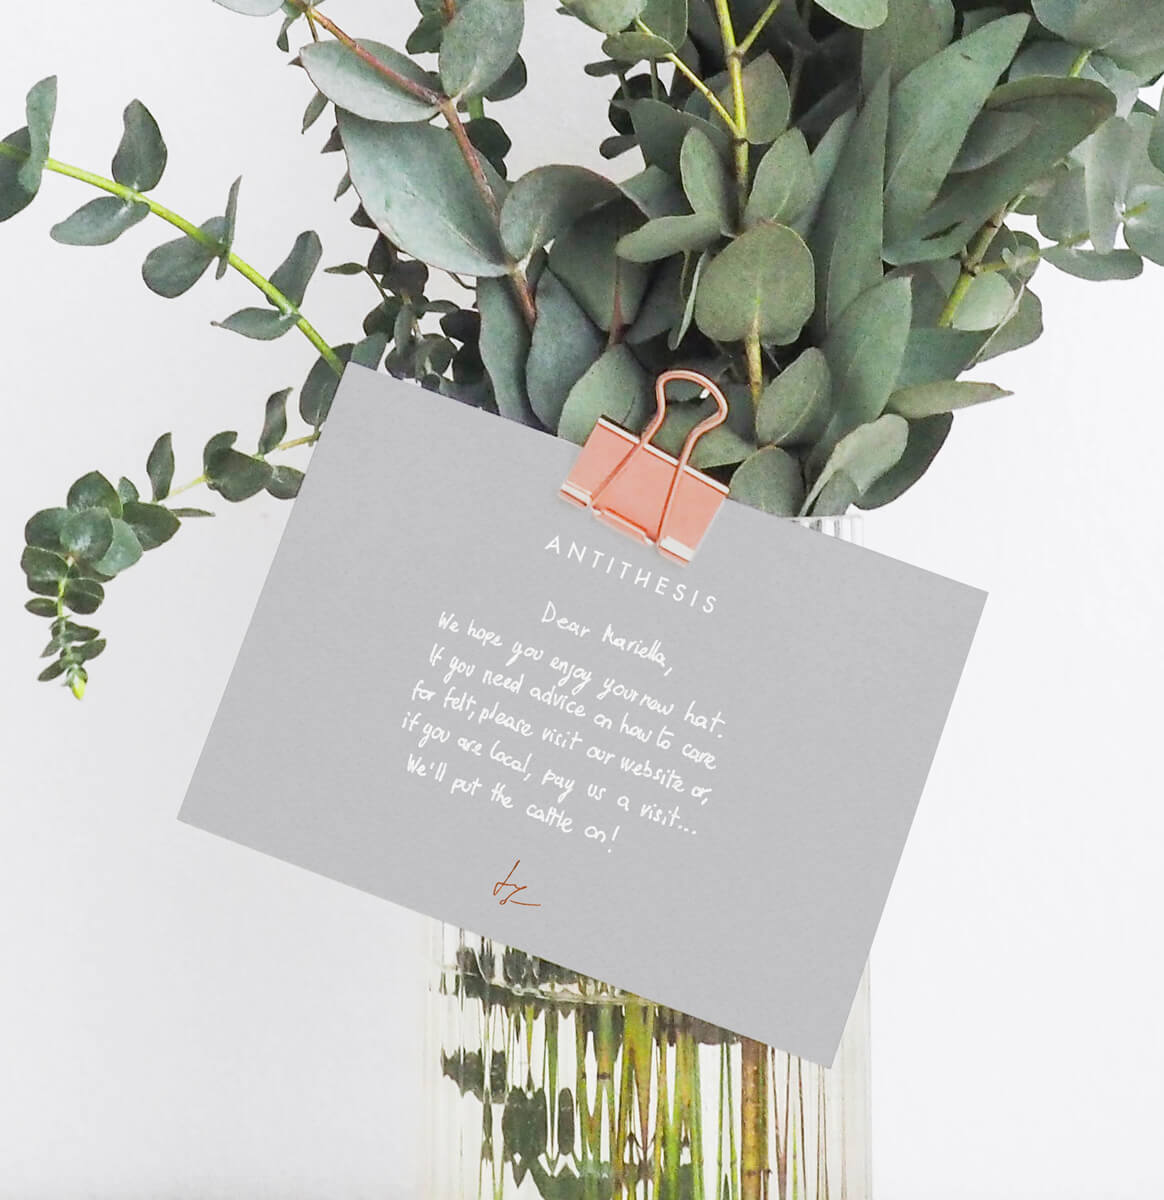 Branded card with handwritten massage hold on a flower vase by a copper pin